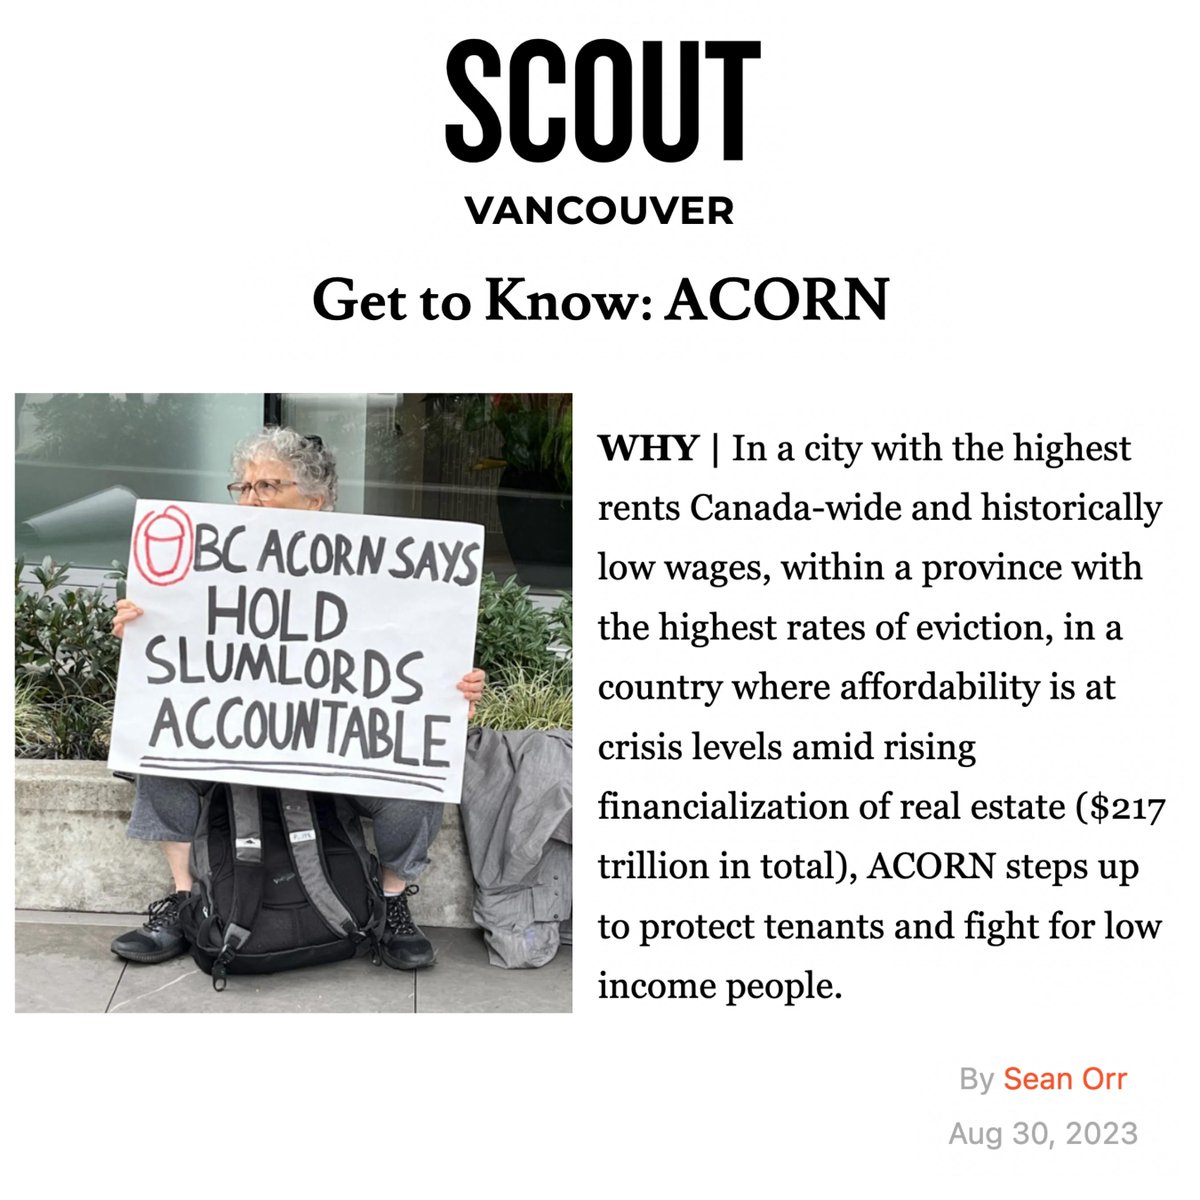 Check out our feature in Scout Vancouver! We are not just any union; we are YOUR union. Together, we advocate for affordable housing and stronger communities. Join ACORN as a member: acorncanada.org/join-us/